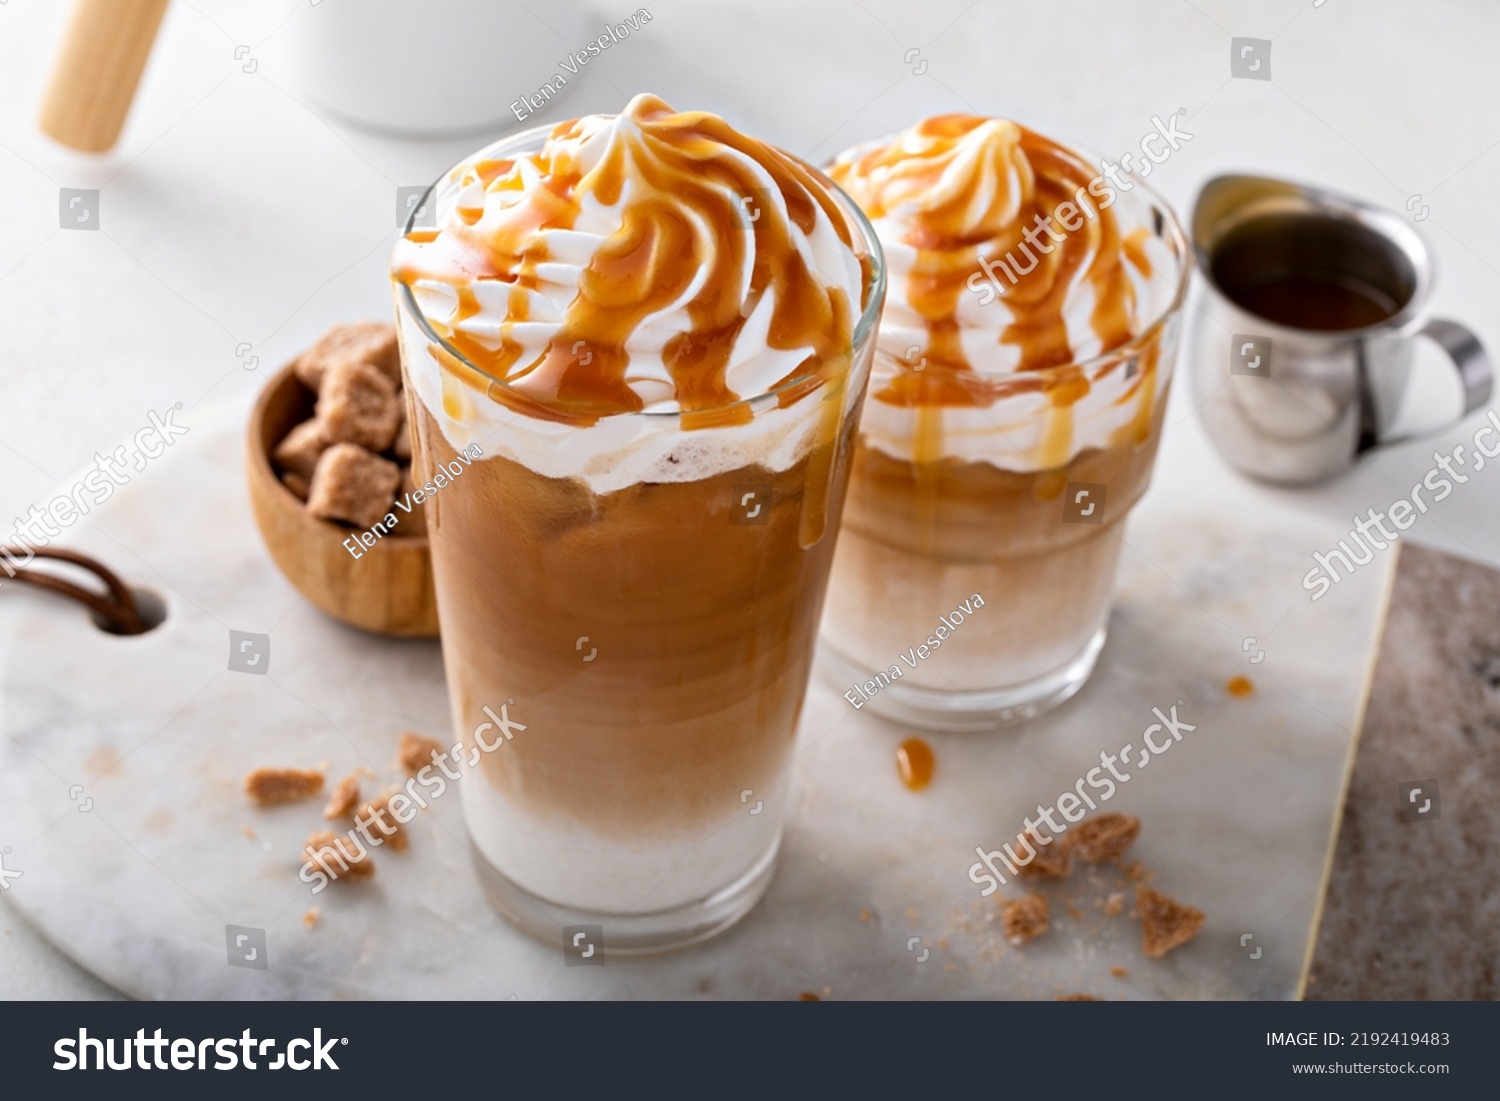 Iced caramel latte topped with whipped cream and caramel sauce, refreshing and sweet coffee drink #2192419483